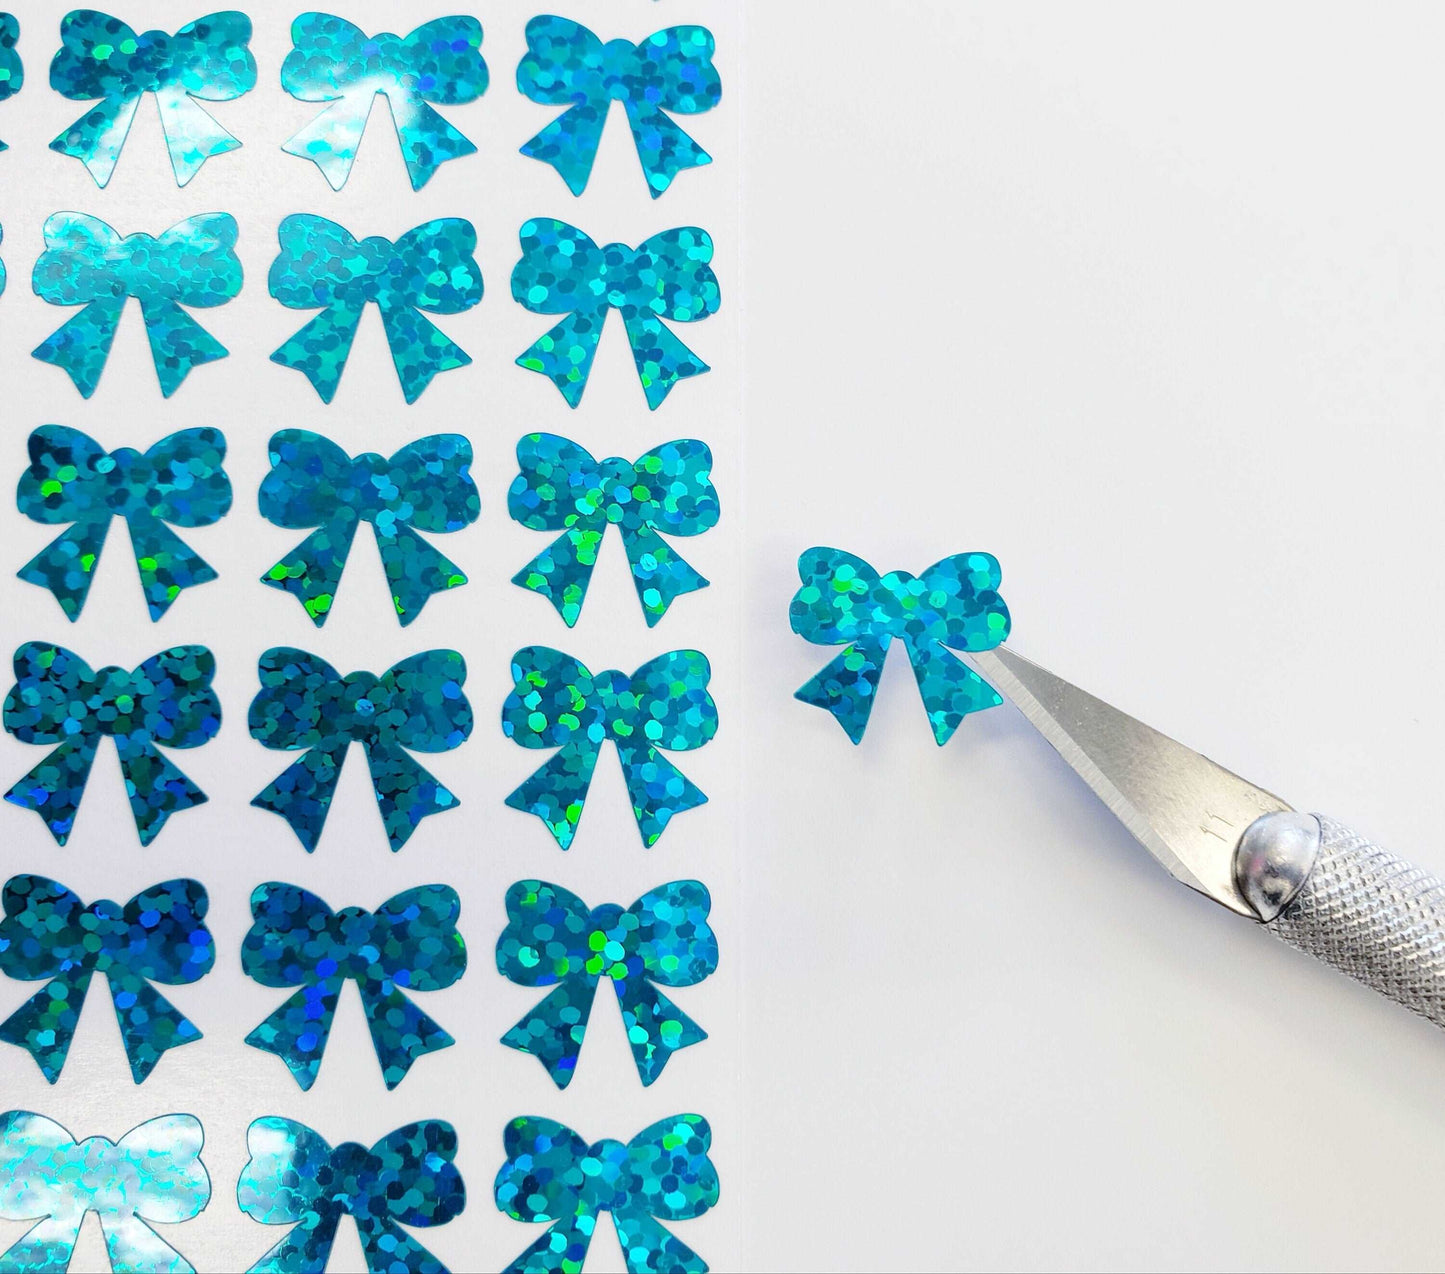 Turquoise Ribbon Stickers, set of 25, 50 or 100 tiny decorative glitter stickers for craft projects, laptops, ornaments and junk journals